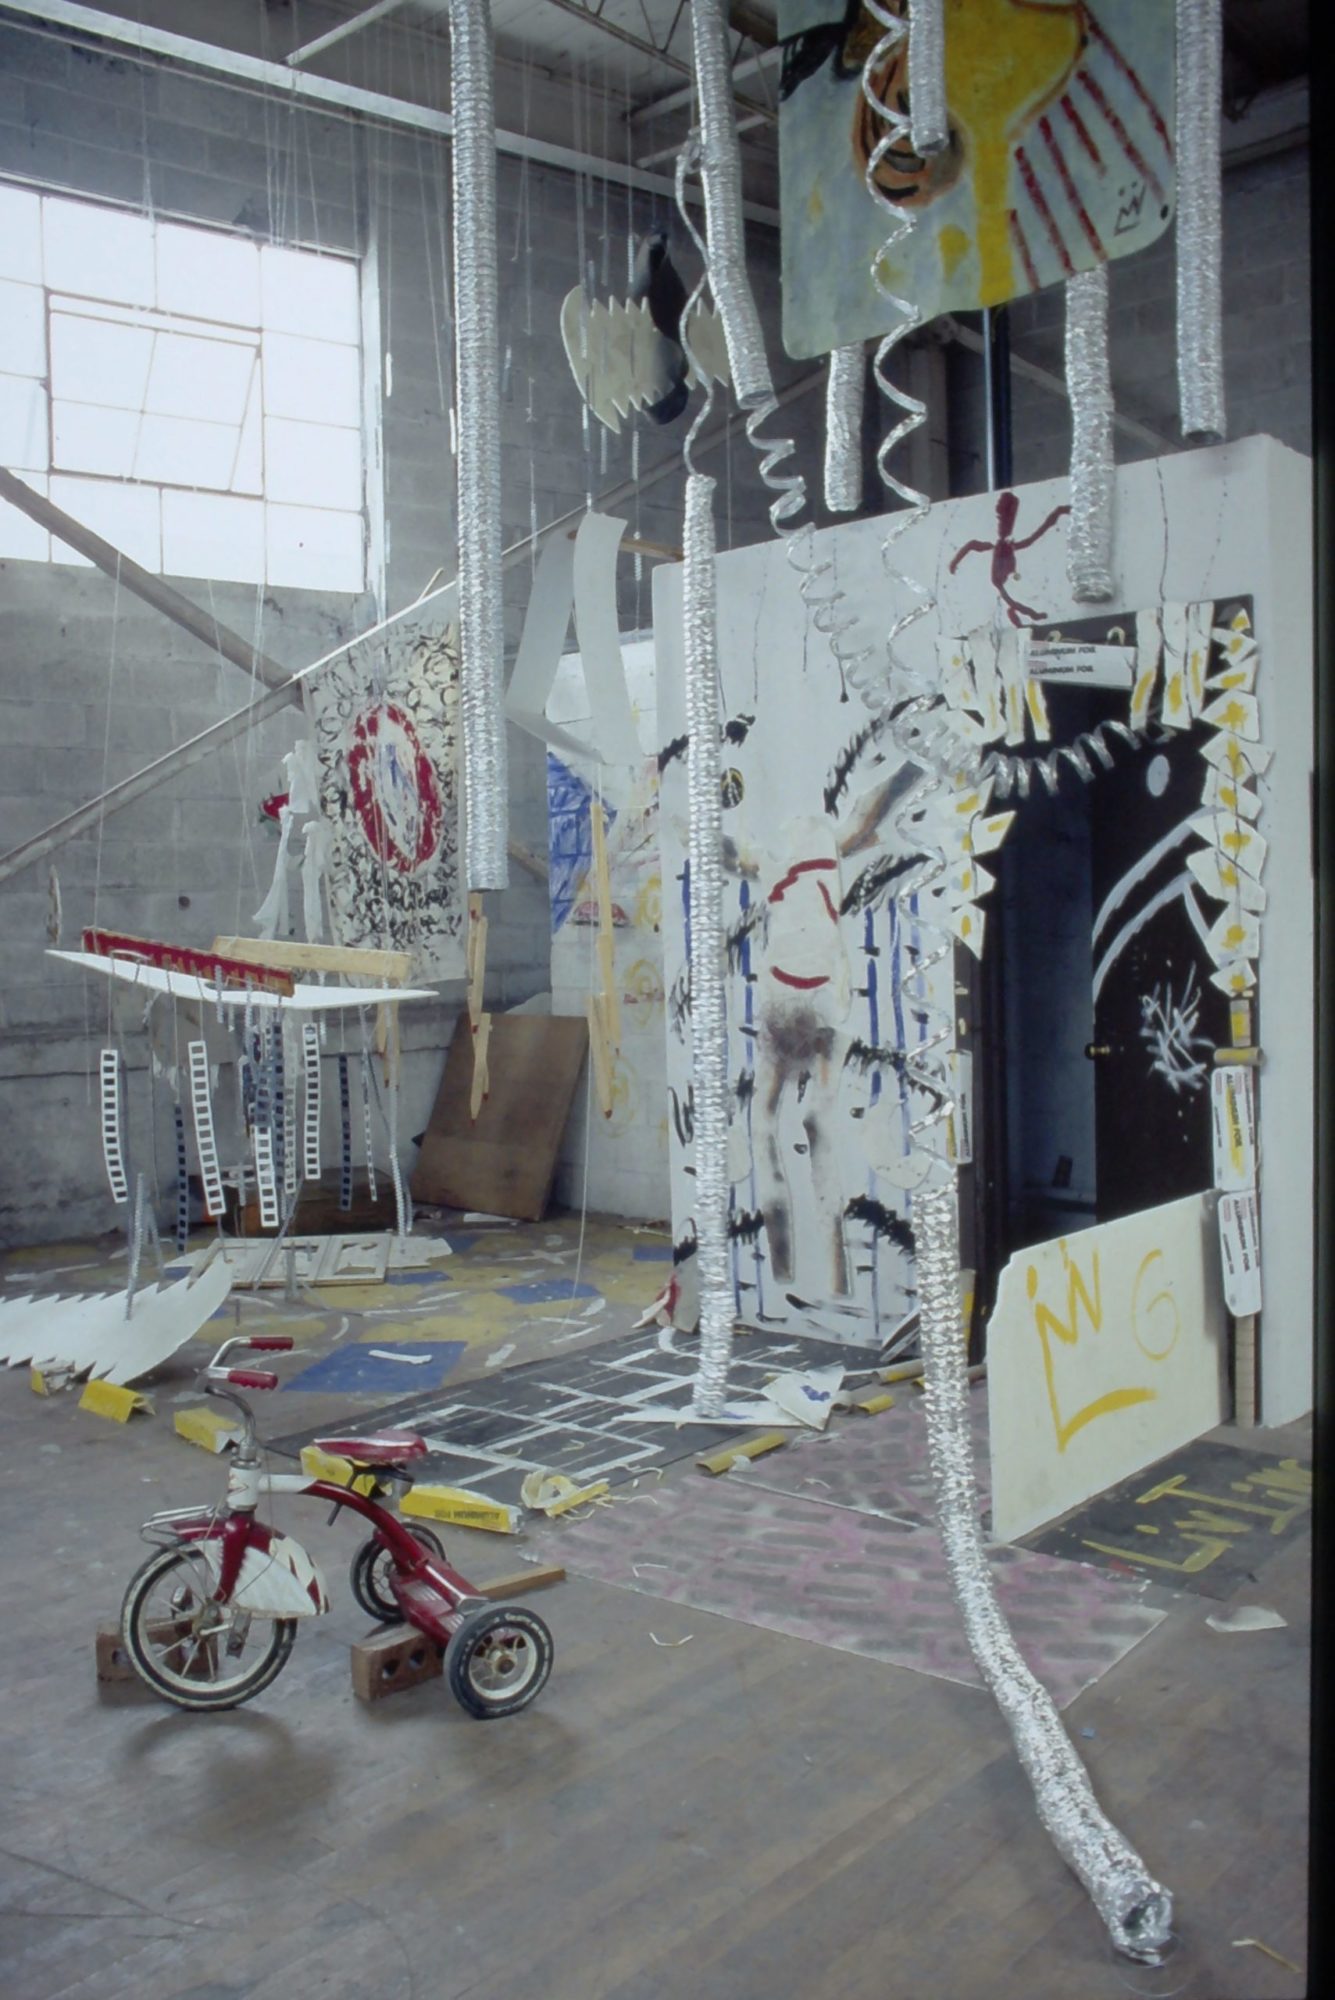 A photograhp of an art installation, which includes several silver hanging tubes and a small tricycle on the ground.